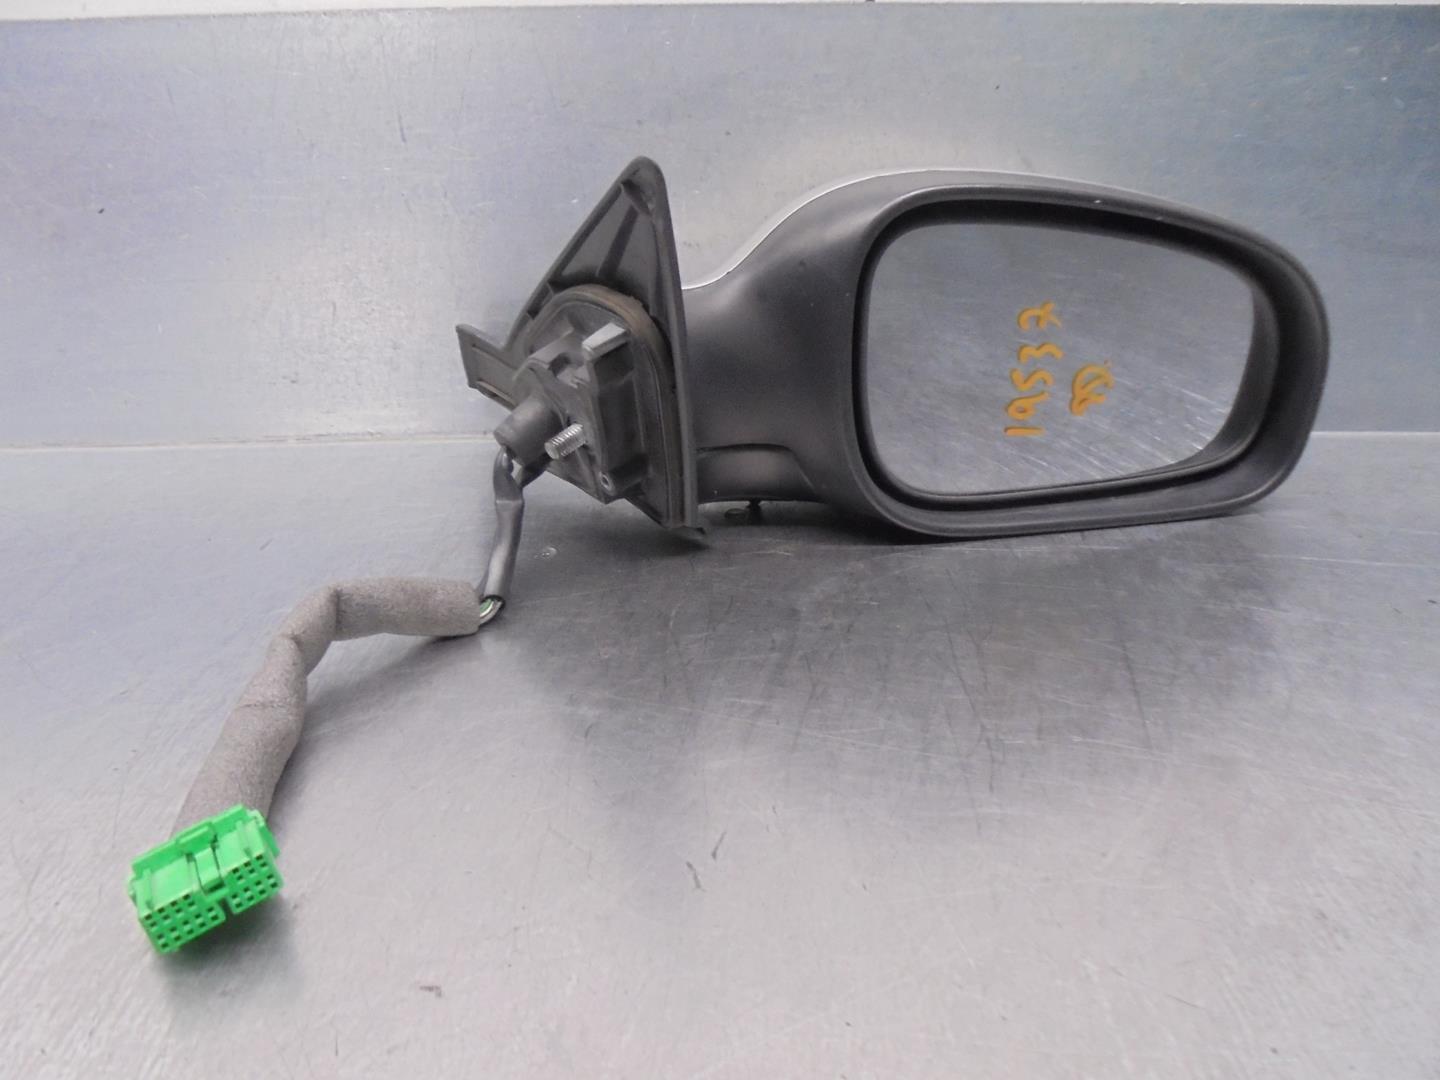 VOLVO S80 1 generation (1998-2006) Right Side Wing Mirror 30634978, 7PINES, GRIS4PUERTAS 22780100